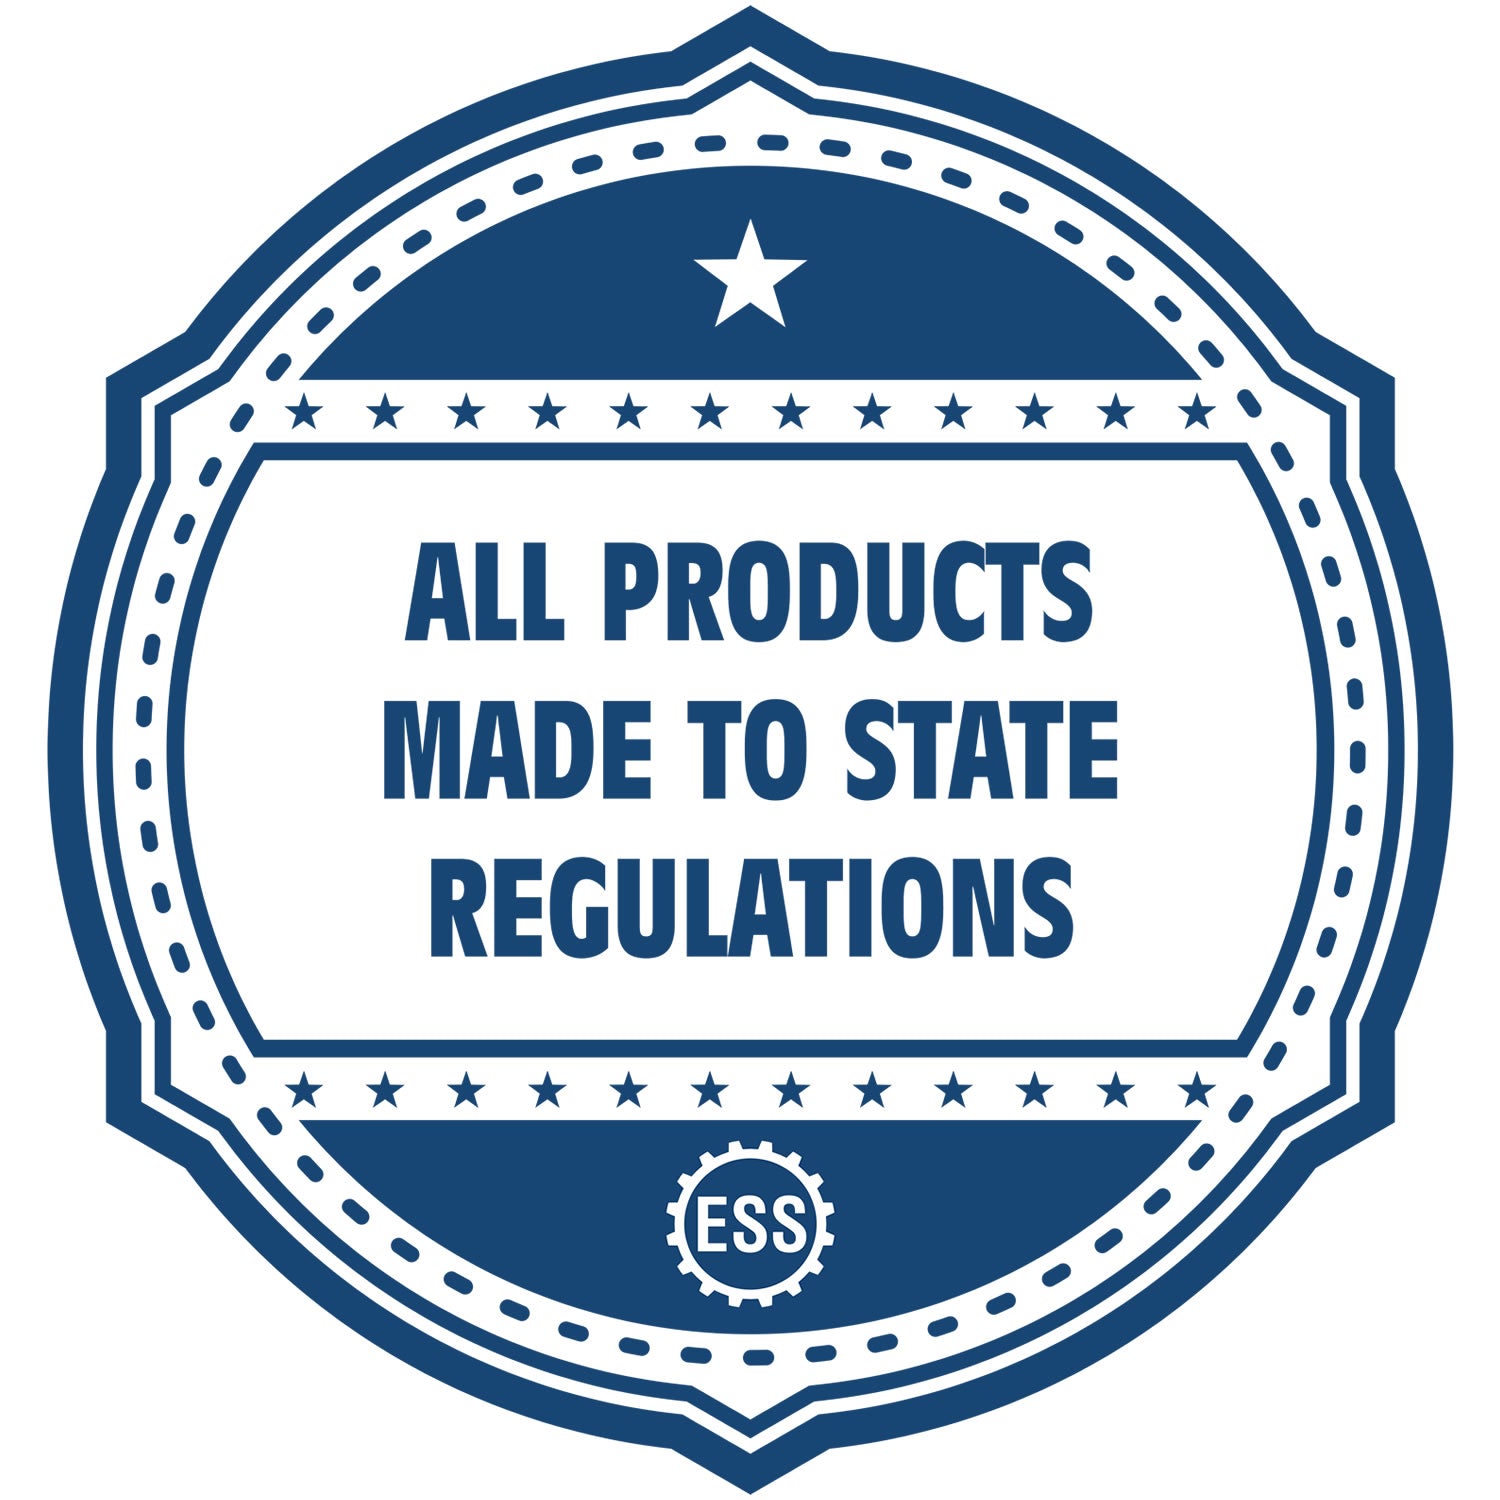 An icon or badge element for the Heavy Duty Tennessee Landscape Architect Cast Iron Embosser showing that this product is made in compliance with state regulations.